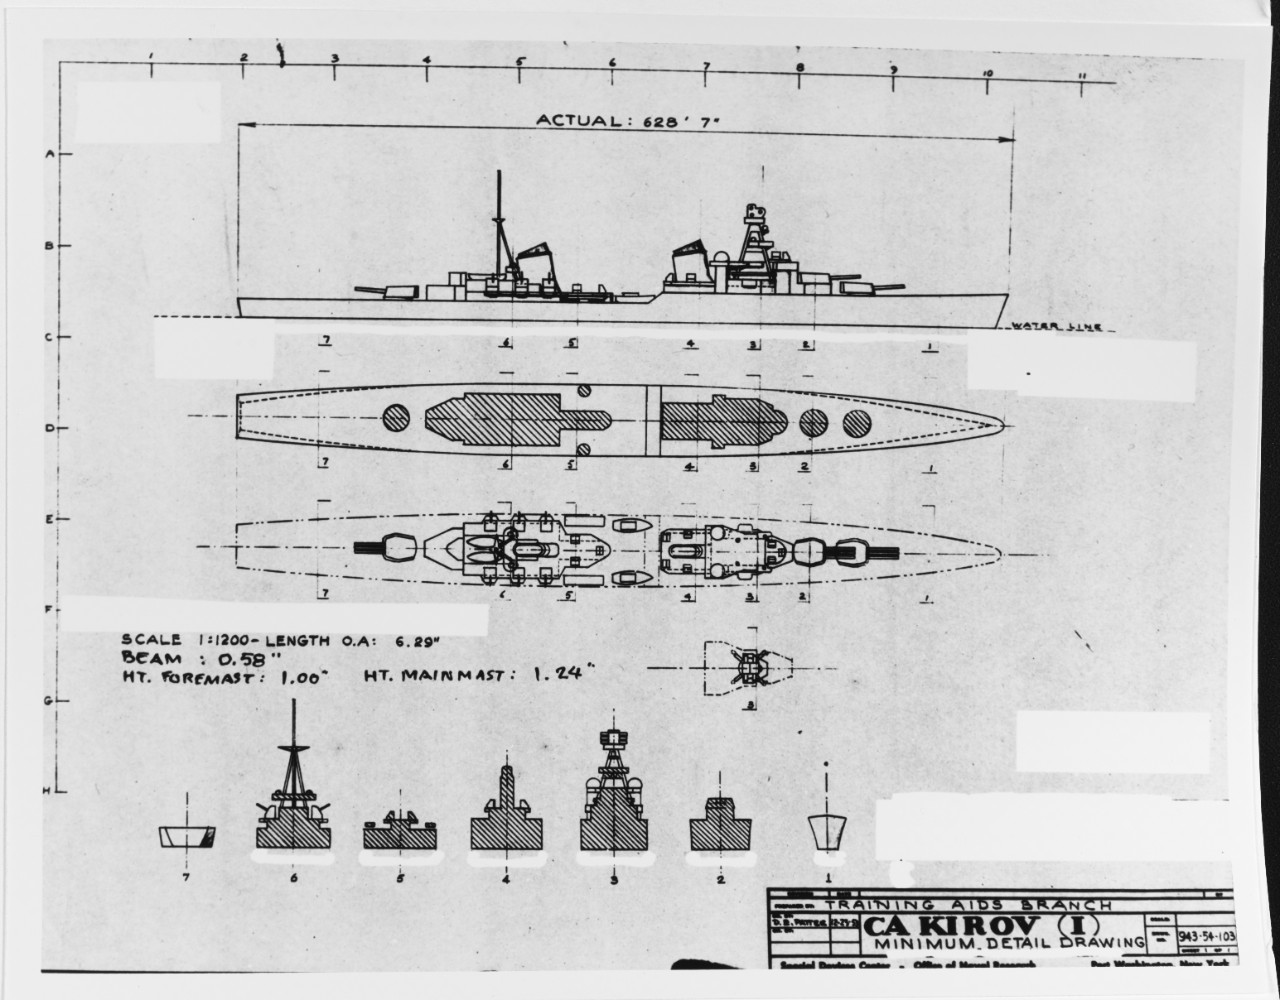 U.S. Navy plans for construction of a 1:1200 scale model of the Soviet heavy cruiser KIROV (1936-circa 1975)